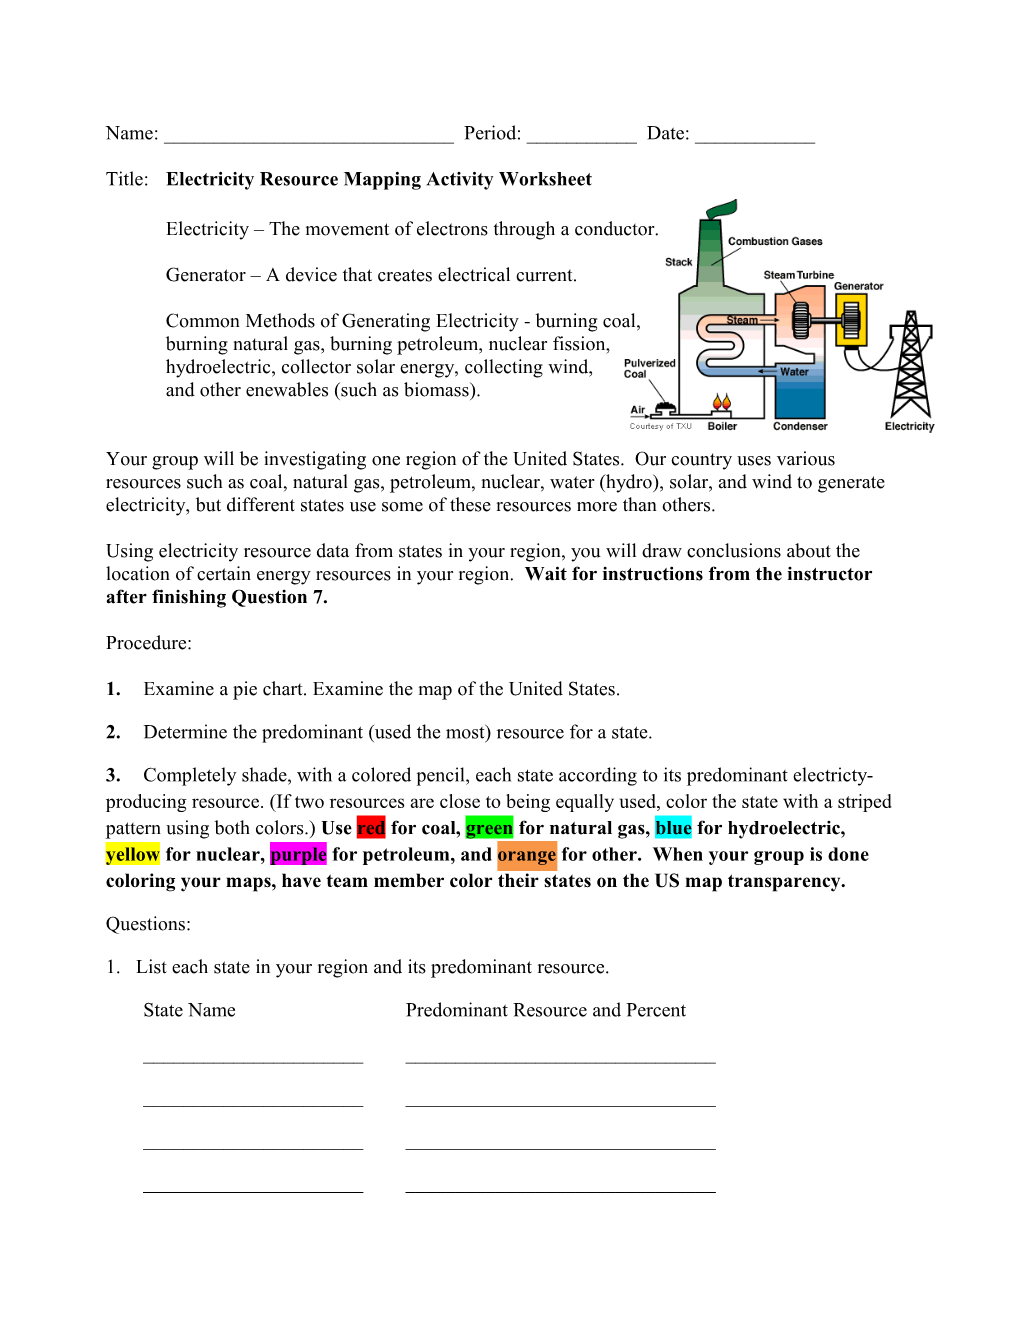 Title: Electricity Resource Mapping Activity Worksheet